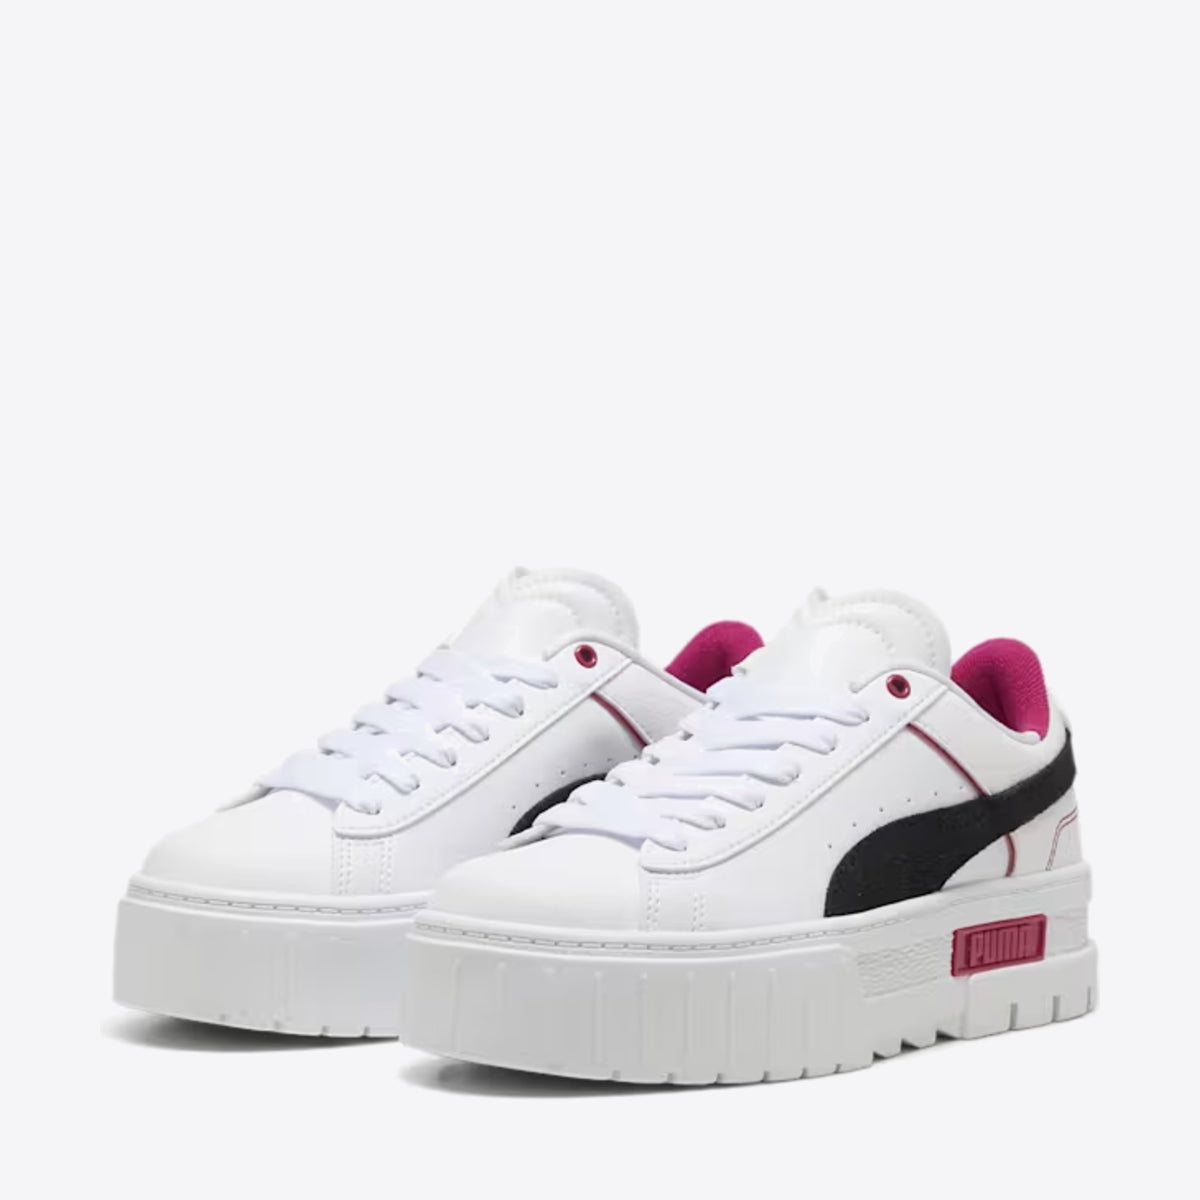 PUMA Mayze Queen of Hearts White/Black/Pink - Image 5